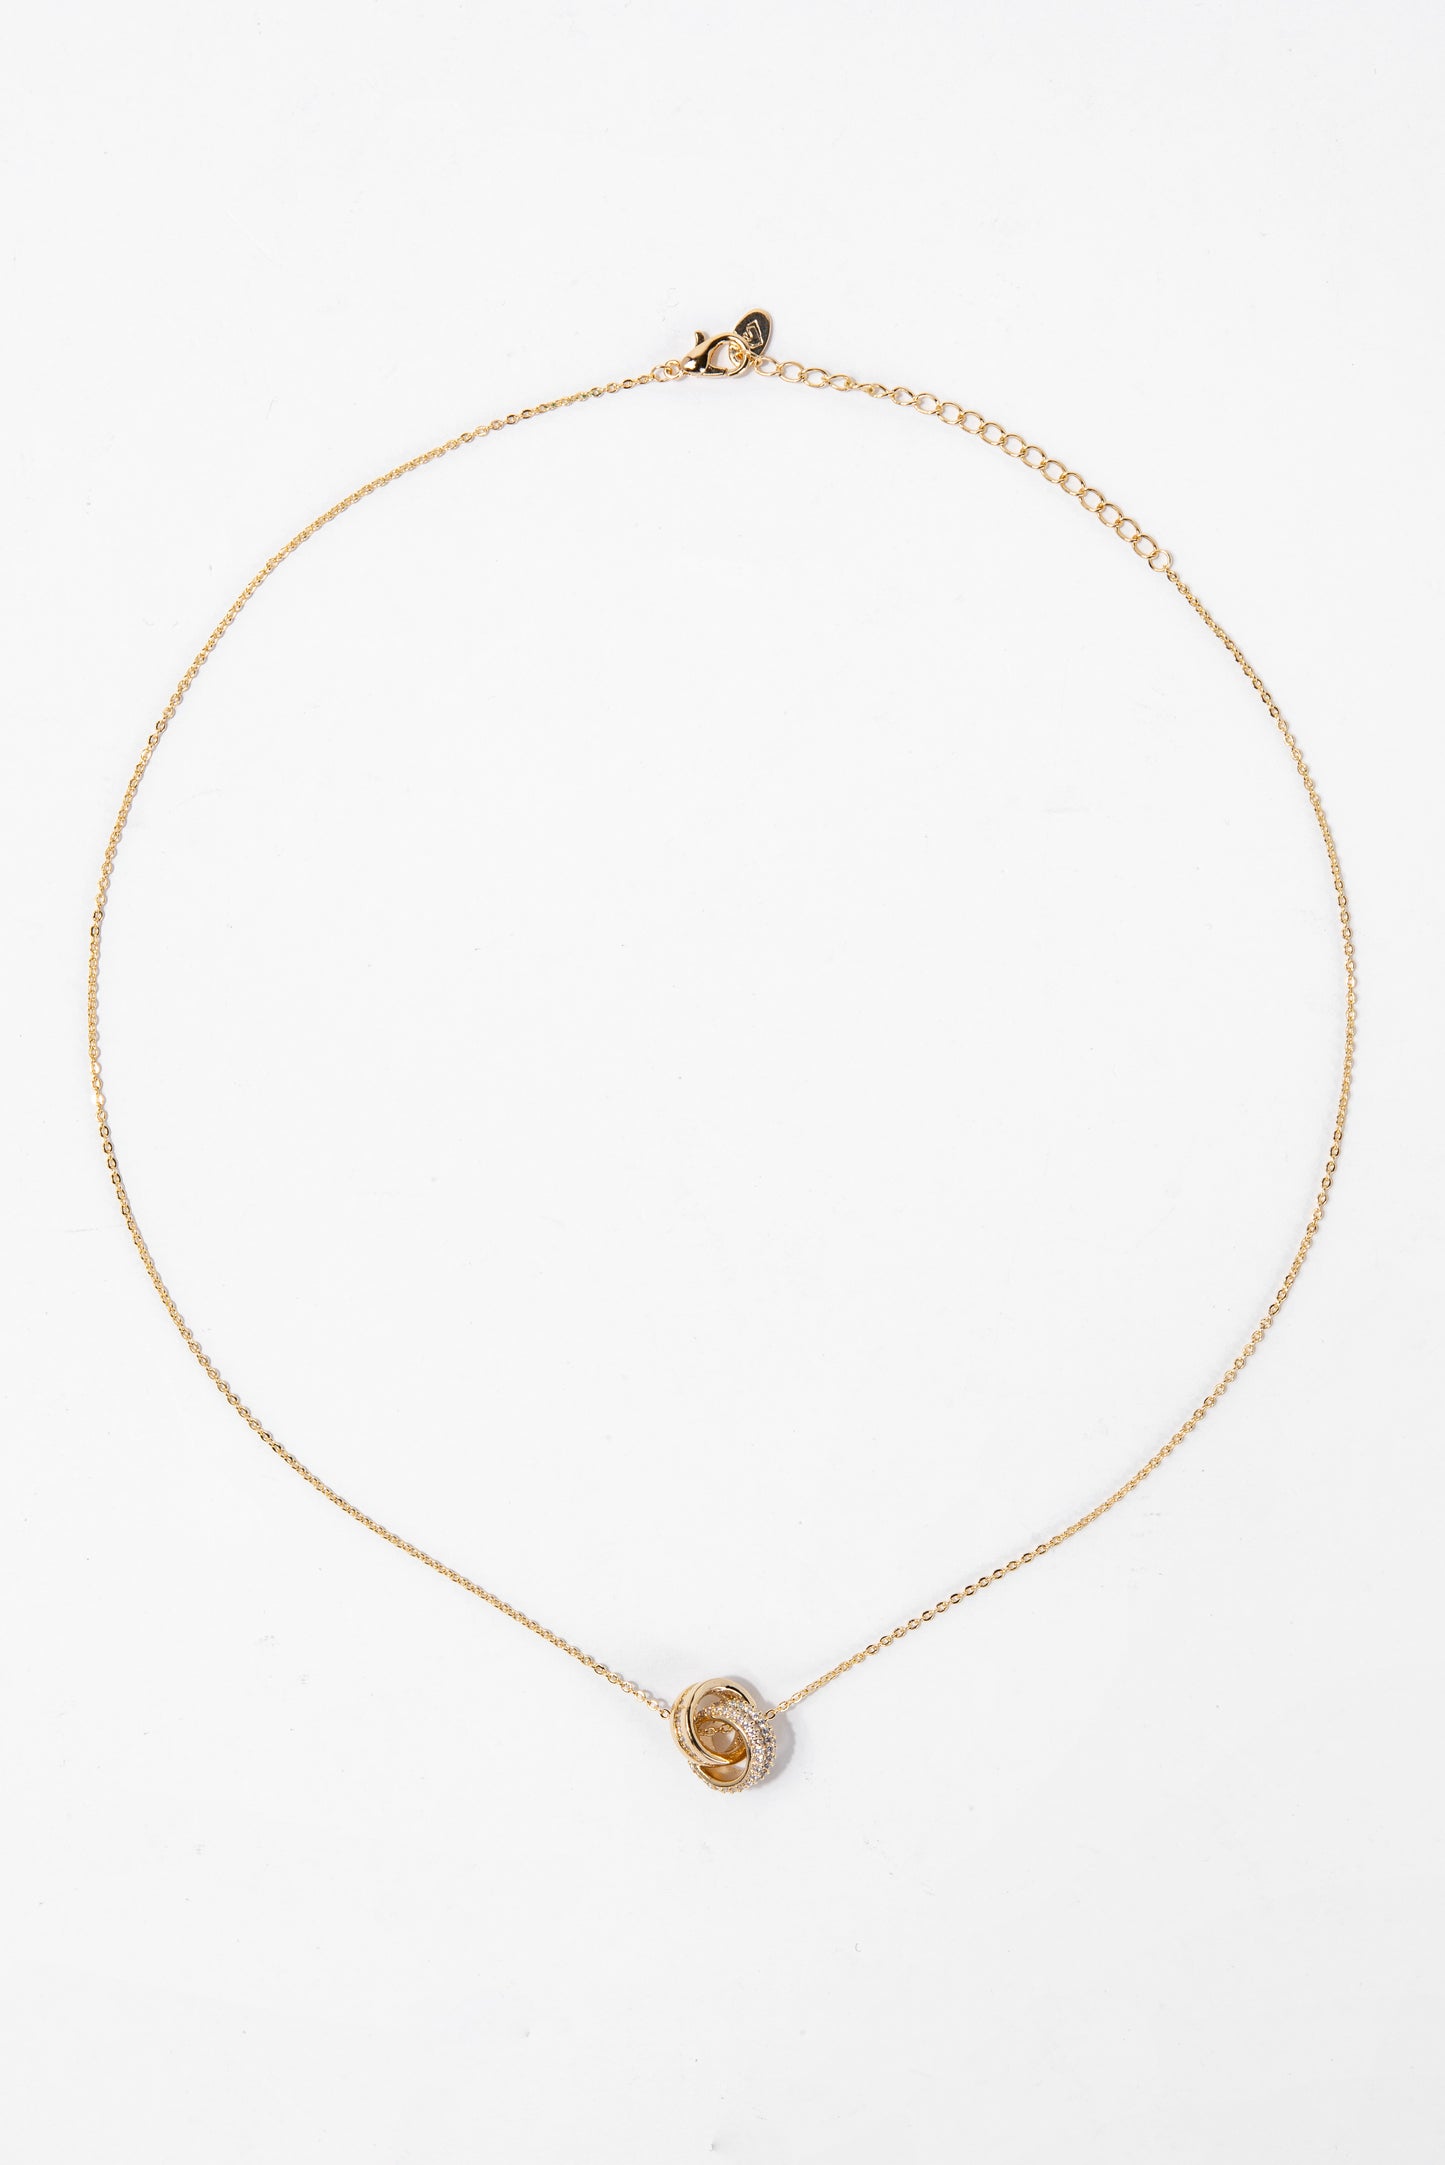 Xiomara Classic CZ Gold Plated Necklace